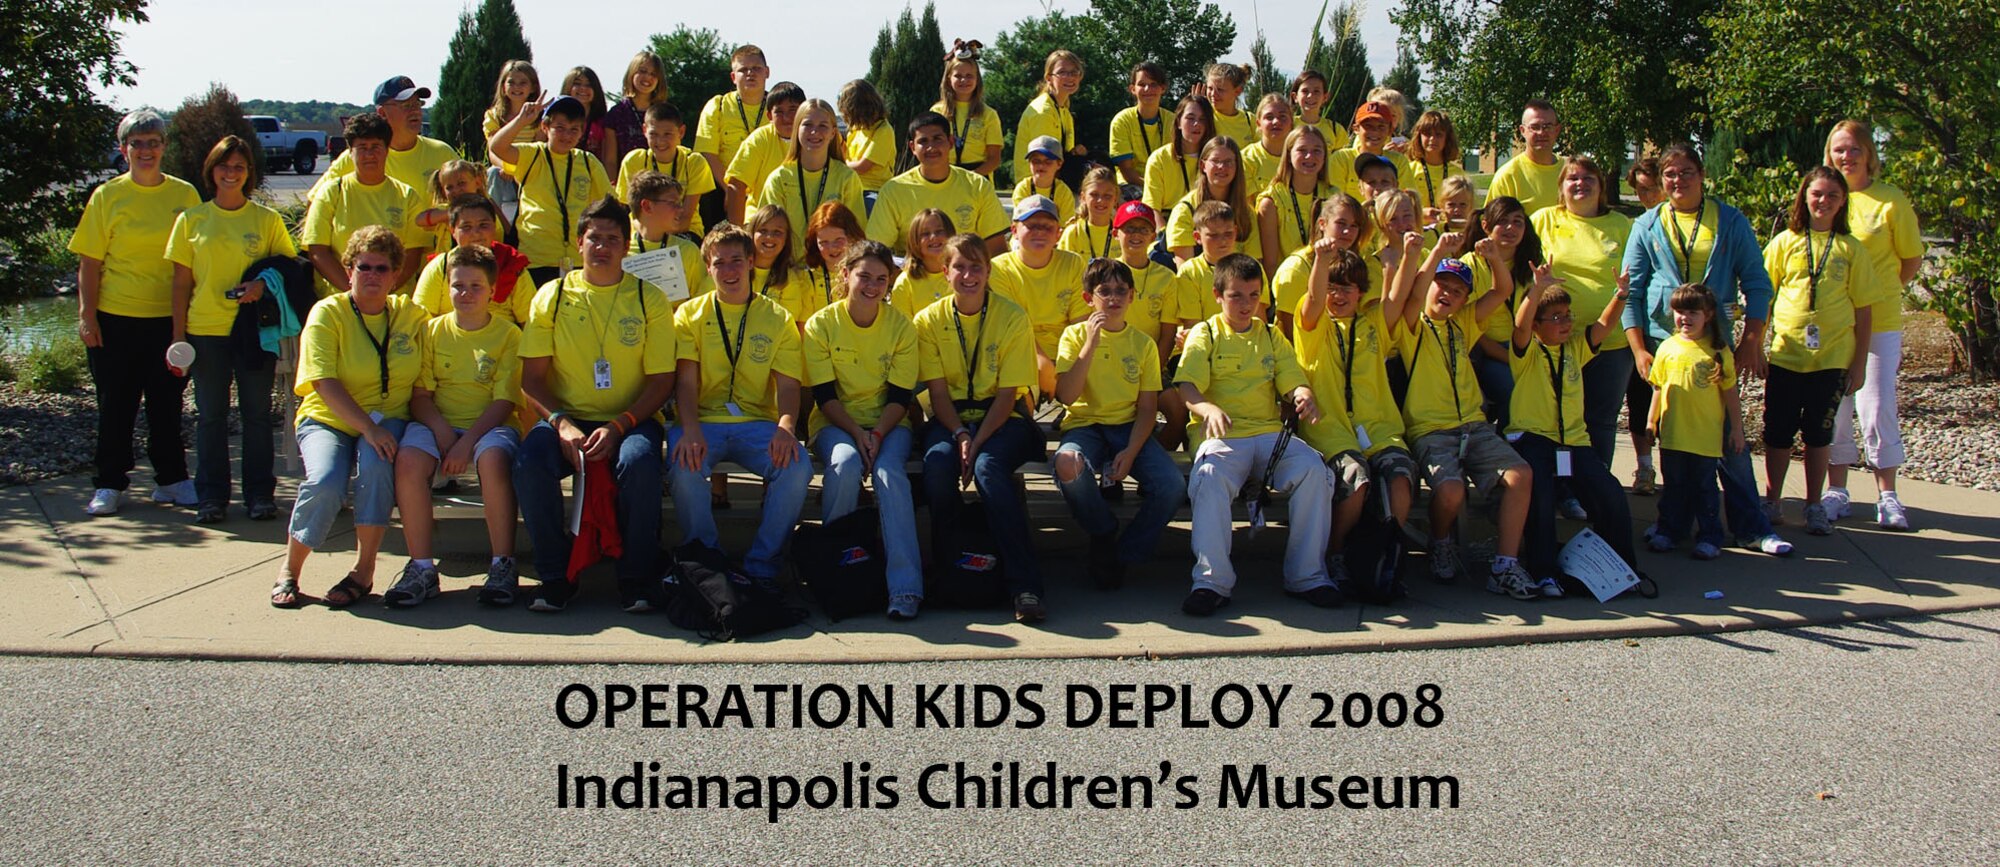 Operation Kids Deploy 2008
Indianapolis Children's Museum